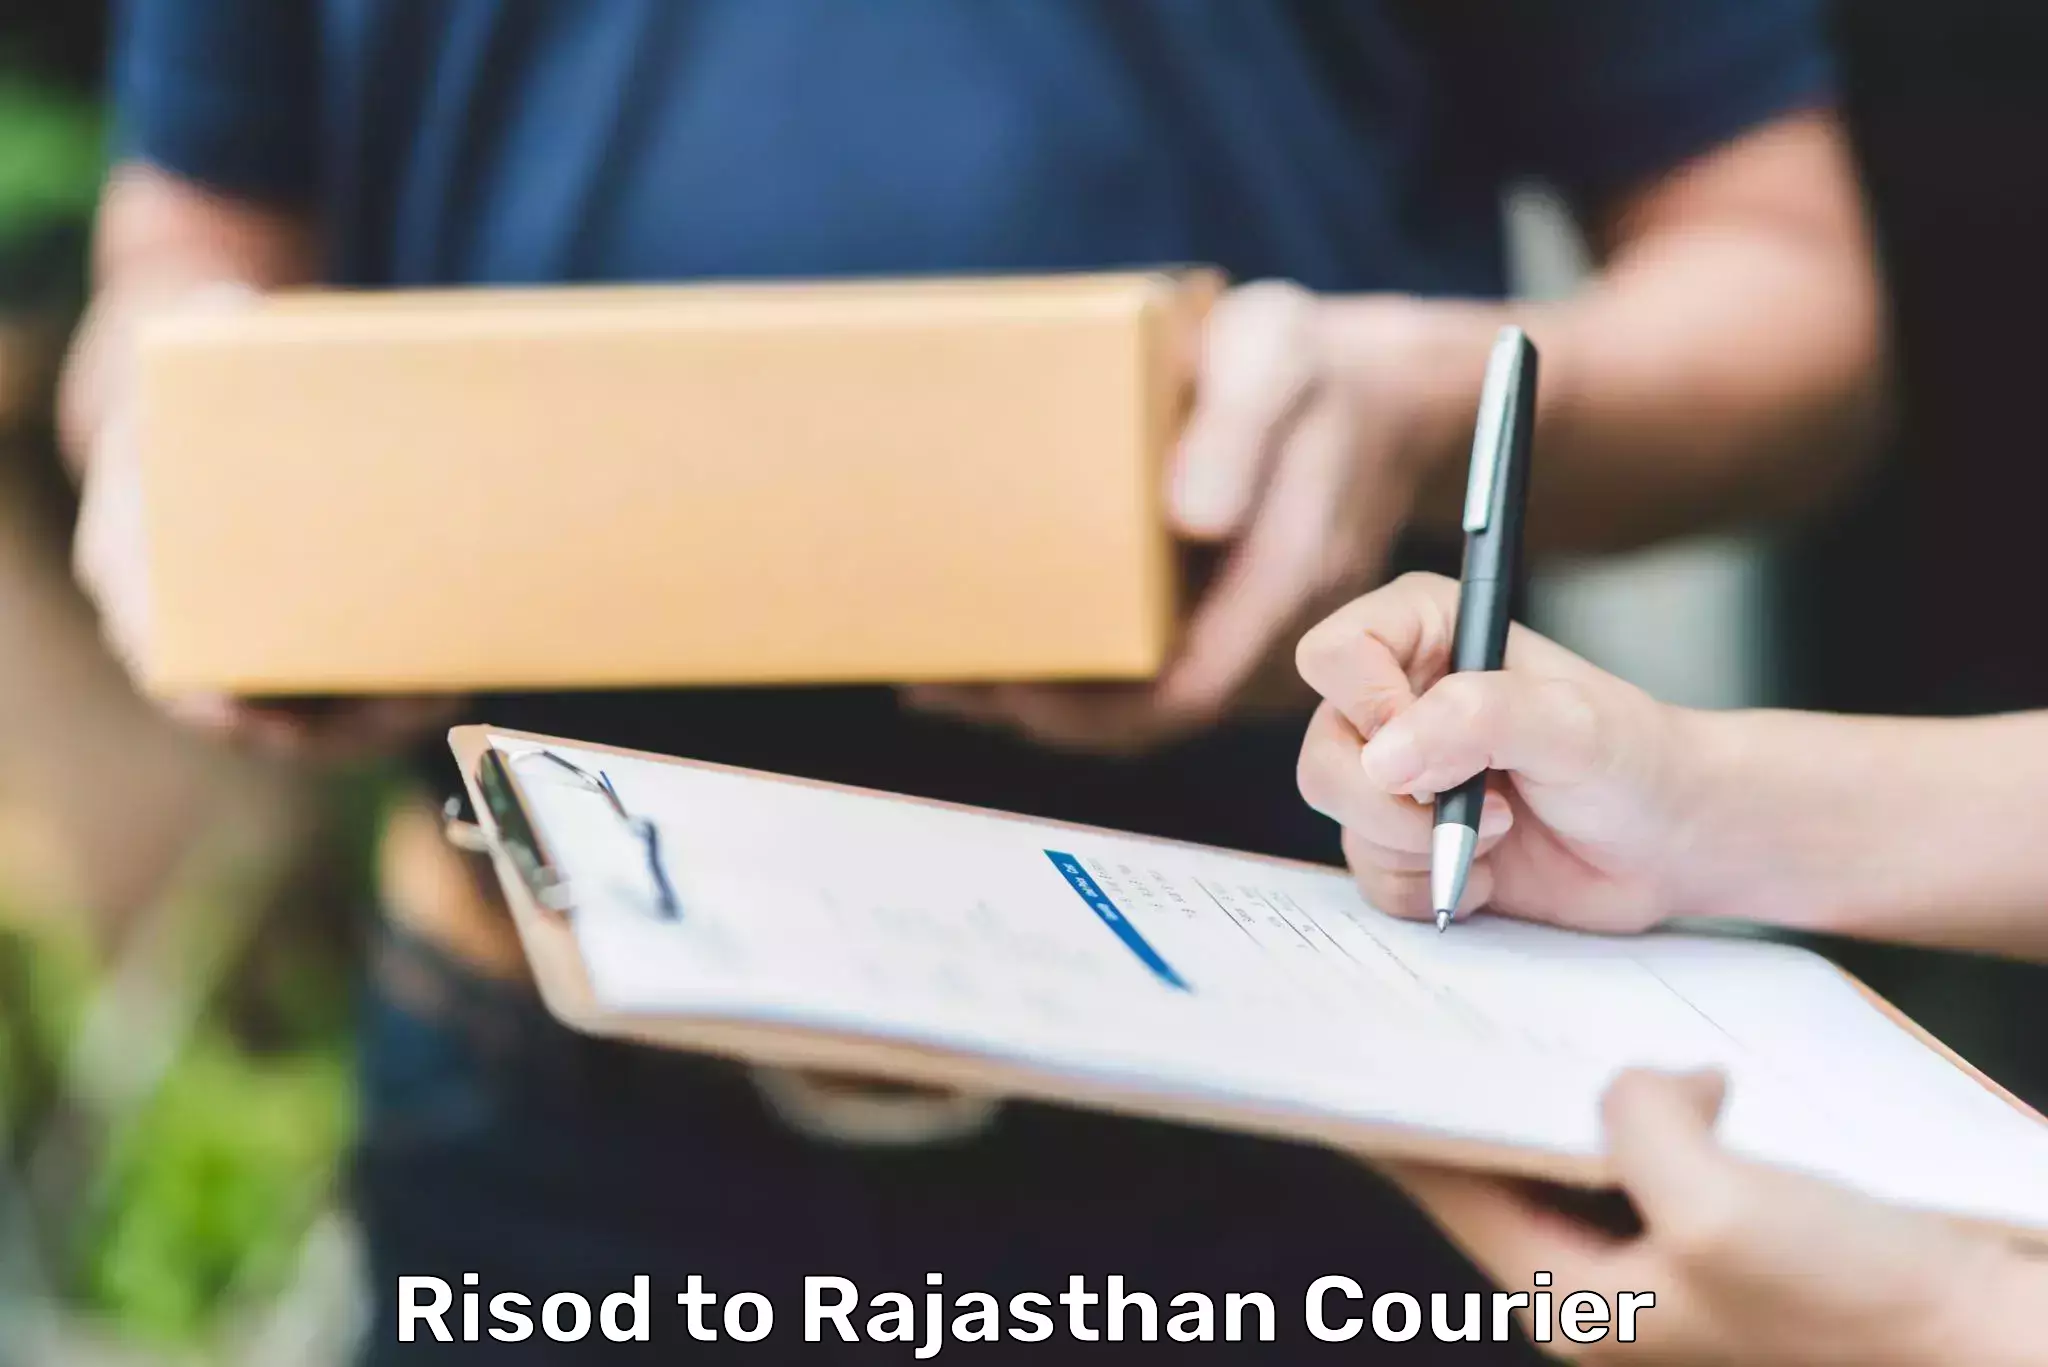 Courier service comparison Risod to Weir